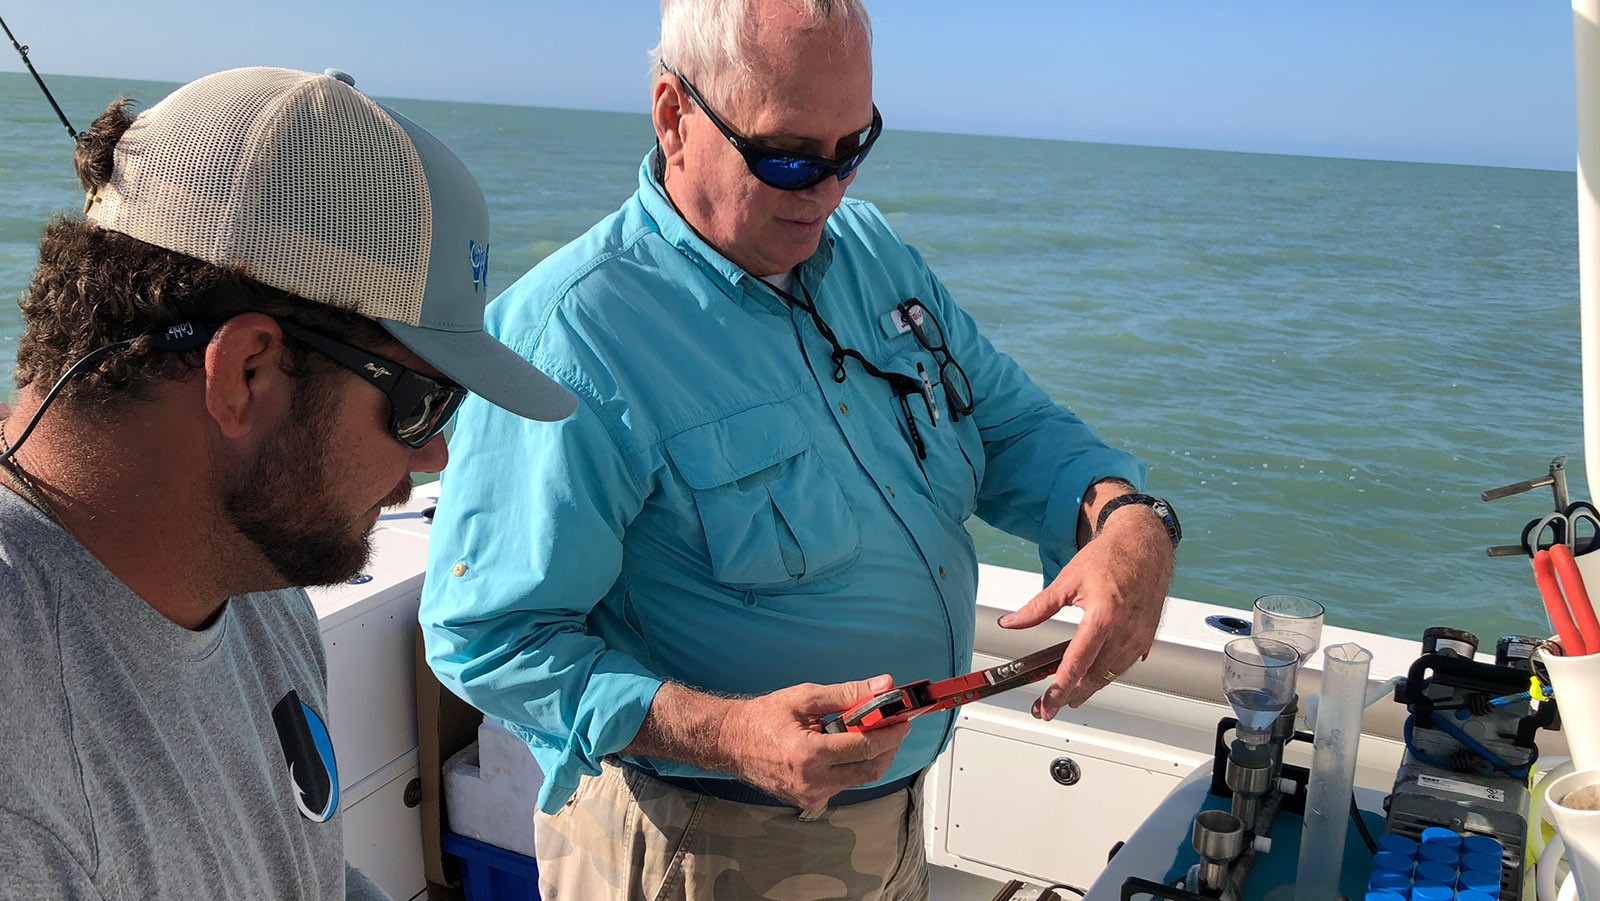 Joe Bishop shown working with local fisherman from the Pine Island community who are partnering with NOAA AOML and SEFSC to take water quality observations to help document the extent and impact of Red Tide. Photo Credit: NOAA.